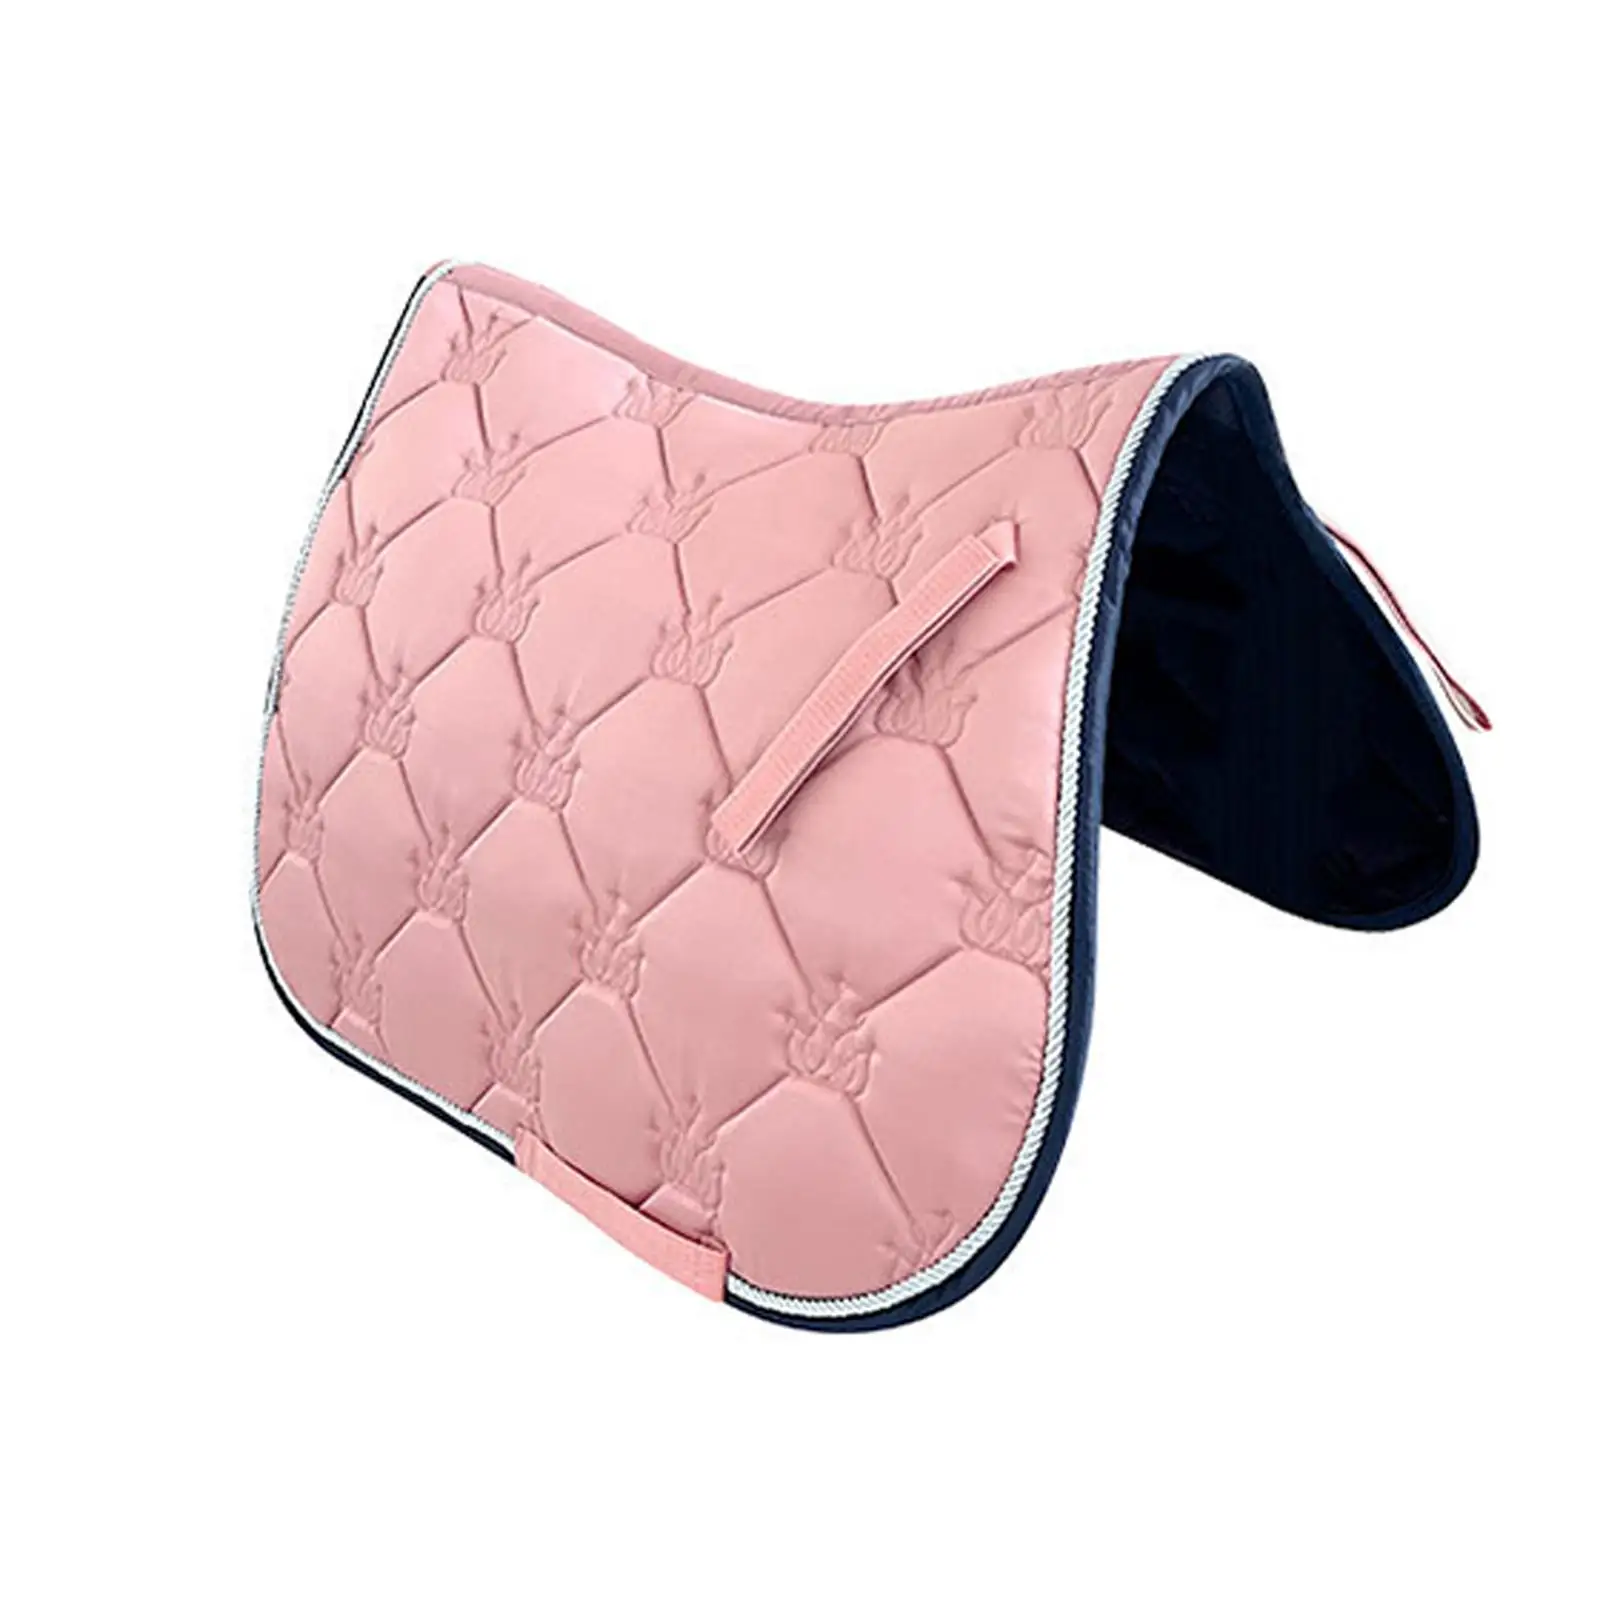 Horse Saddle Pad Equestrian Riding Equipment Portable Protective Comfortable